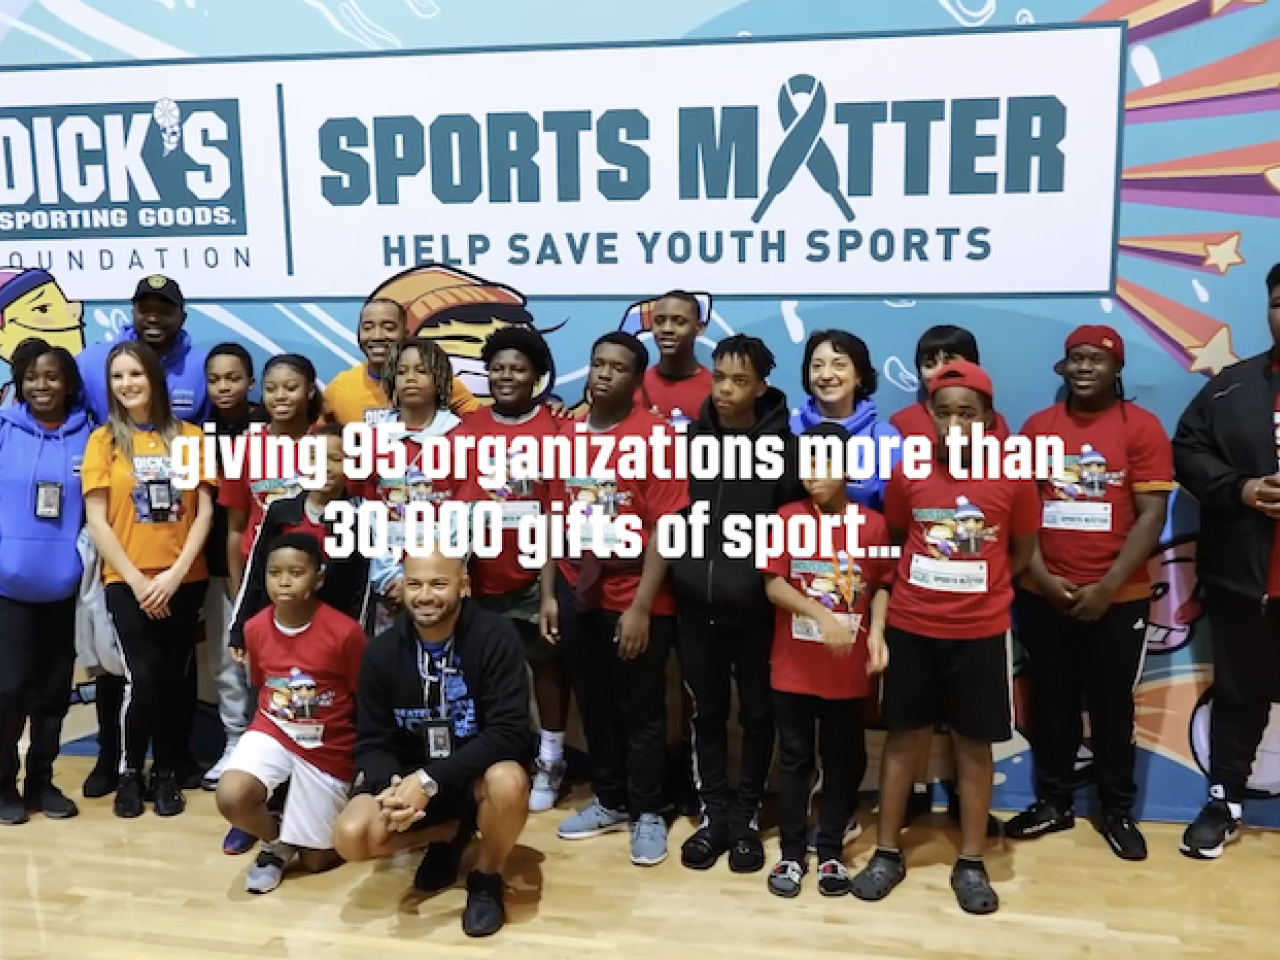 DICK'S Sporting Goods: Sports Matter - Help Save Youth Sports